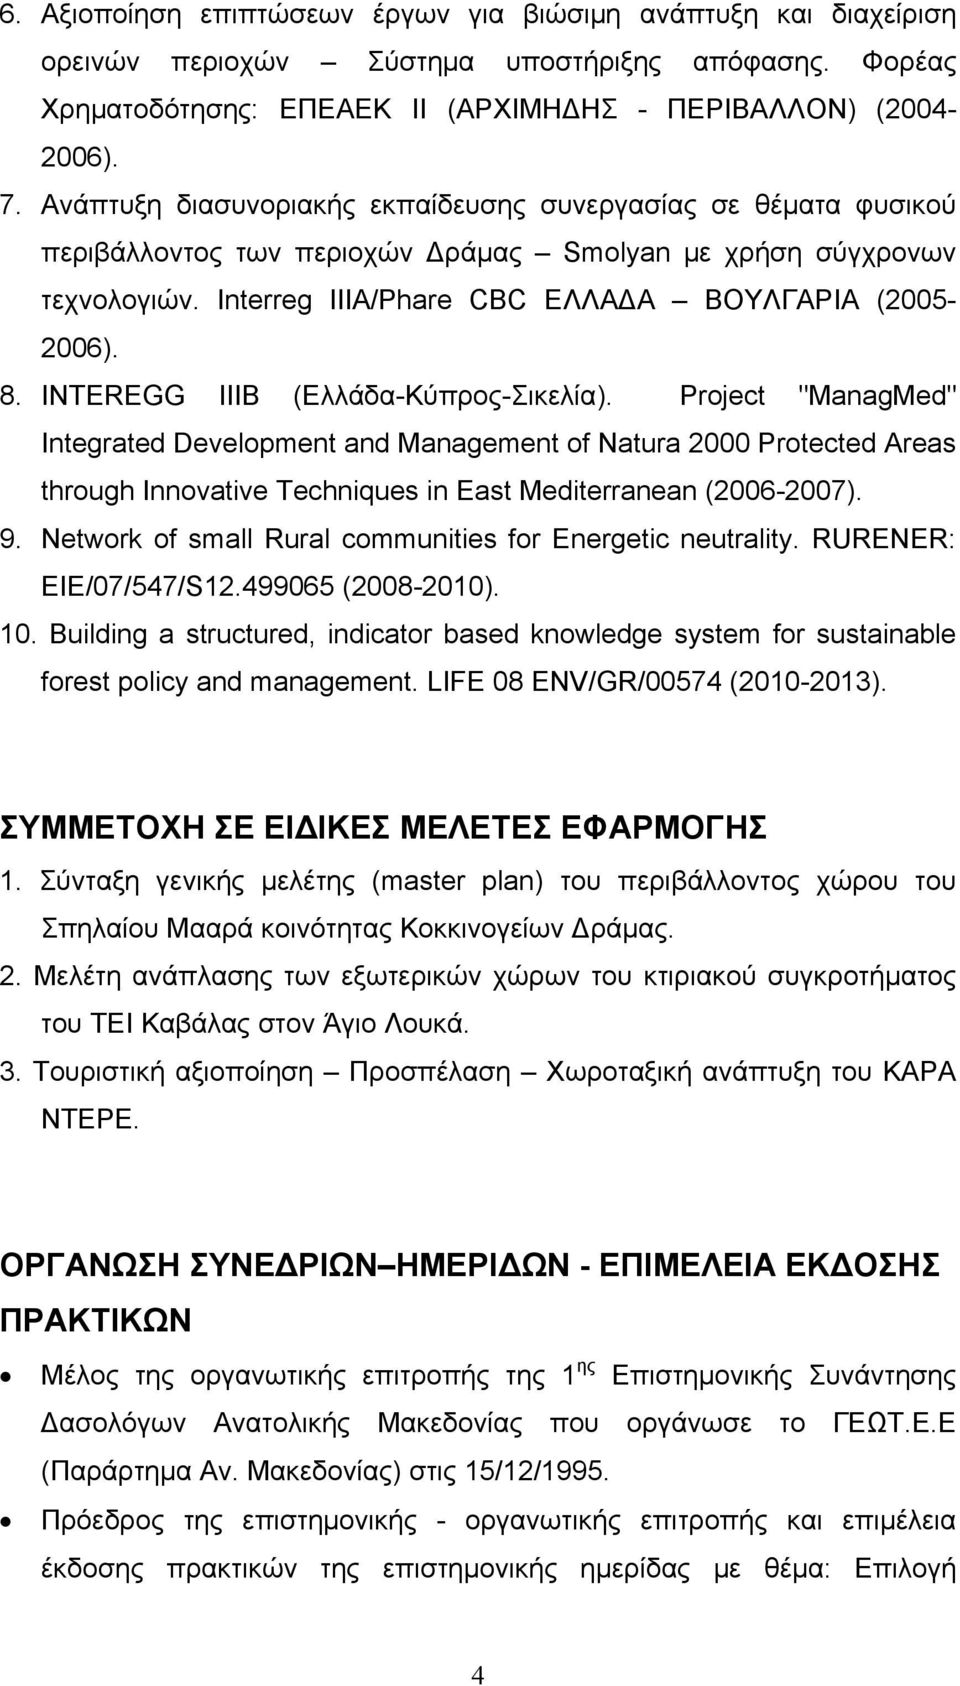 INTEREGG IIIB (Ελλάδα-Κύπρος-Σικελία). Project "ManagMed" Integrated Development and Management of Natura 2000 Protected Areas through Innovative Techniques in East Mediterranean (2006-2007). 9.